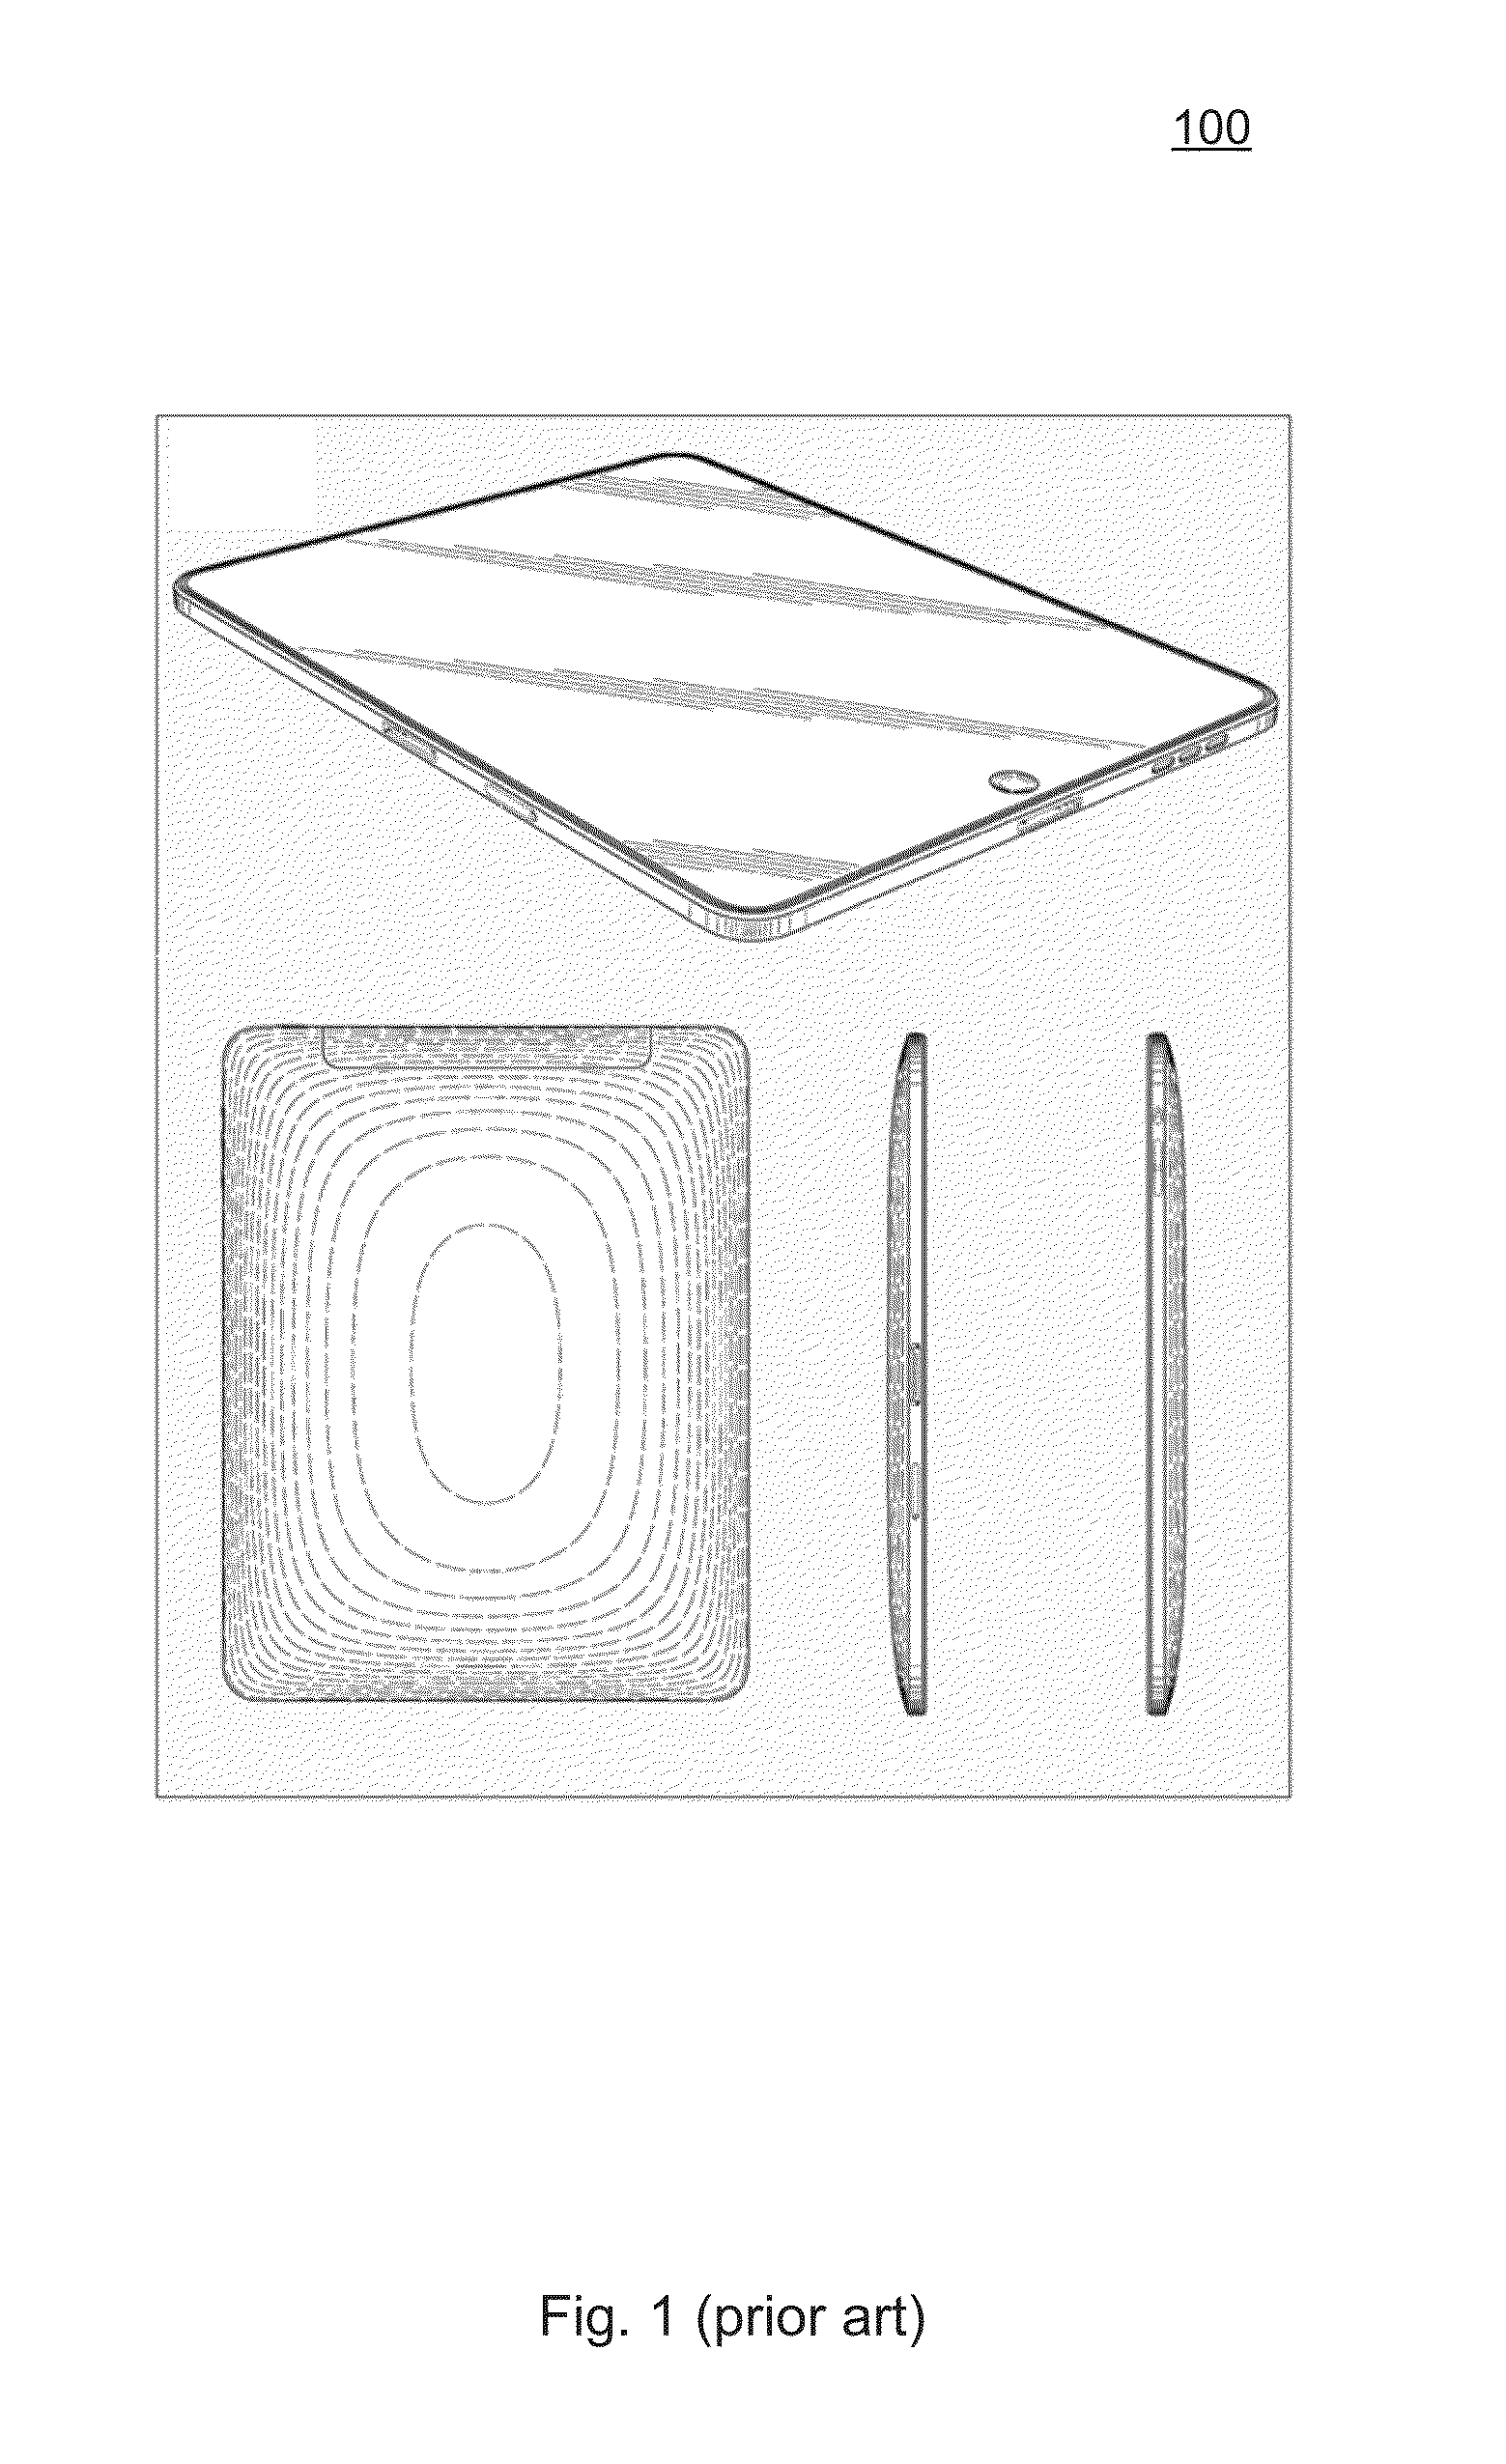 Electronic device with both inflexible display screen and flexible display screen